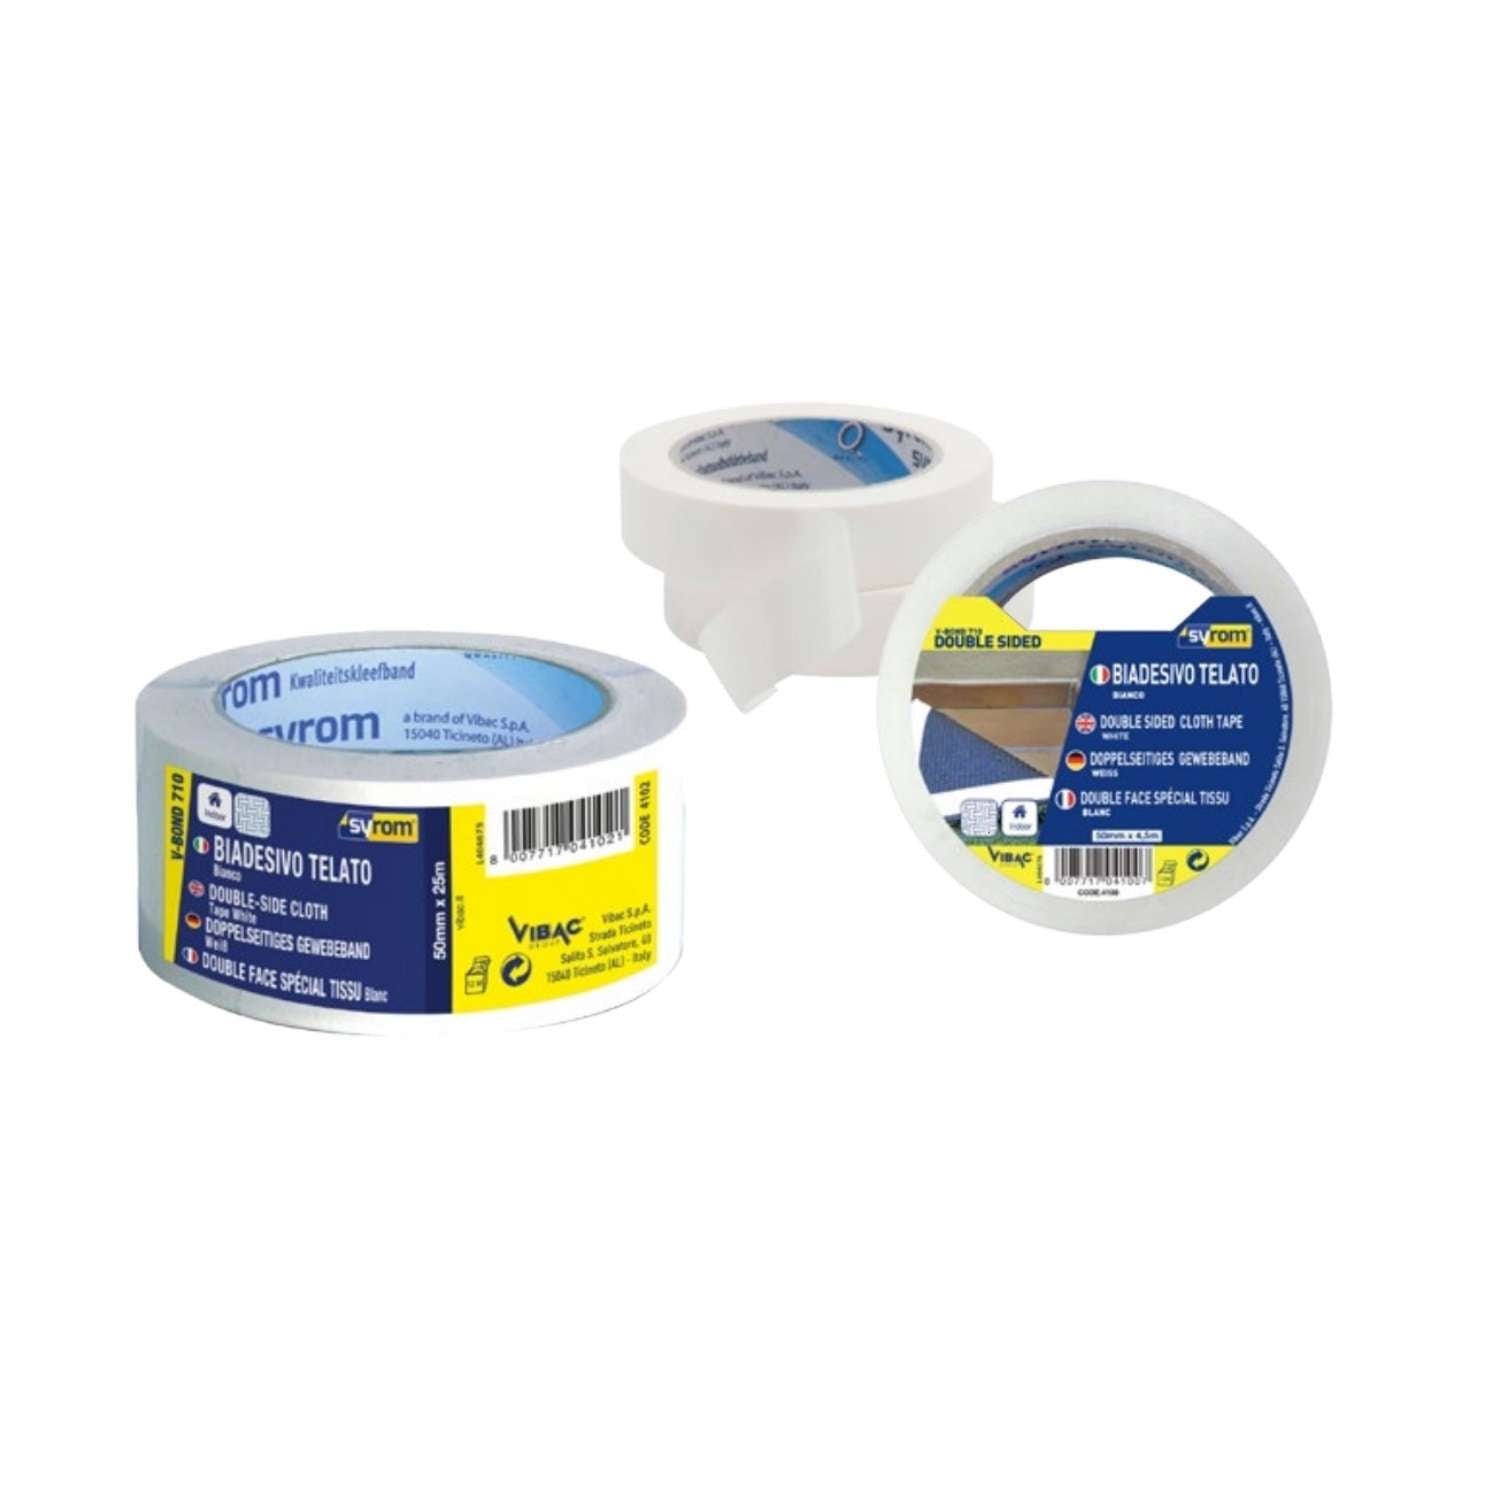 Double sided canvas tape 50mm x 25mt white - Syrom 4102